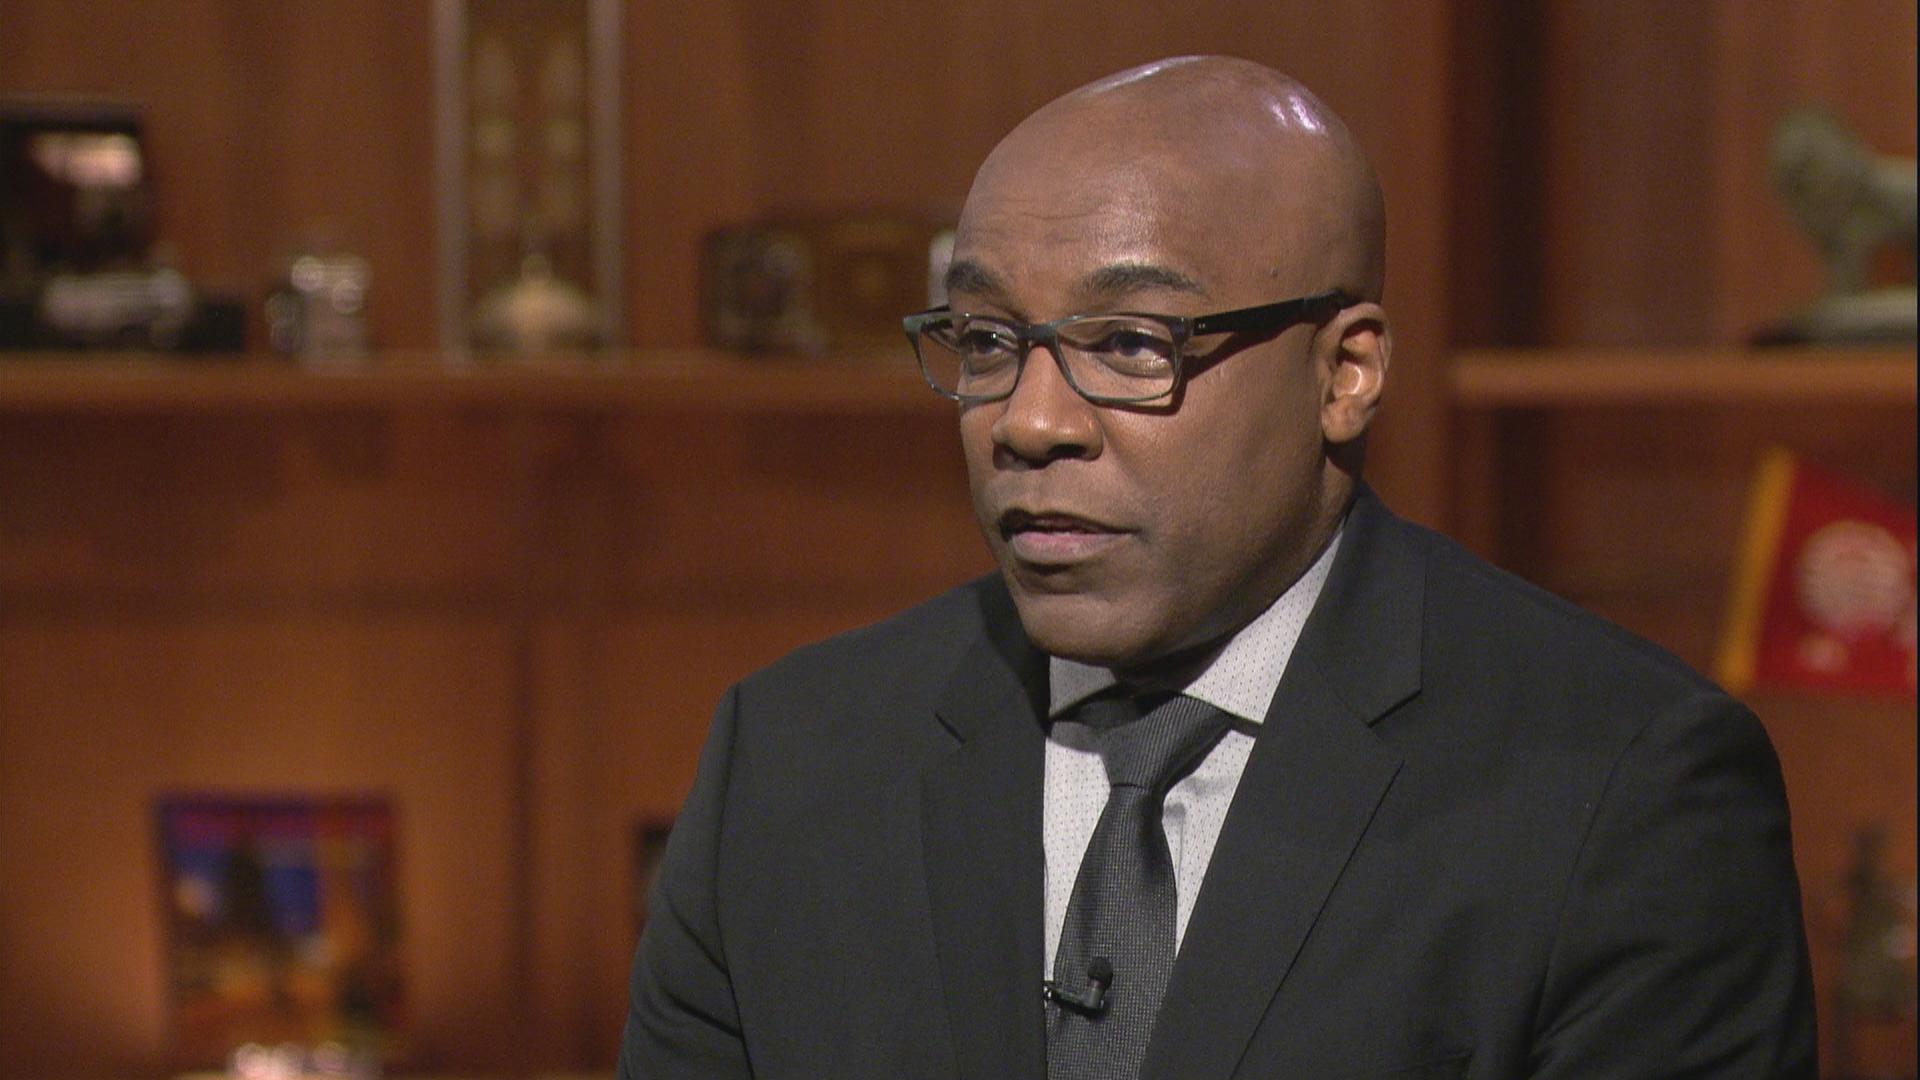 Illinois Attorney General Kwame Raoul appears on “Chicago Tonight” on Feb. 21, 2019. (WTTW News)